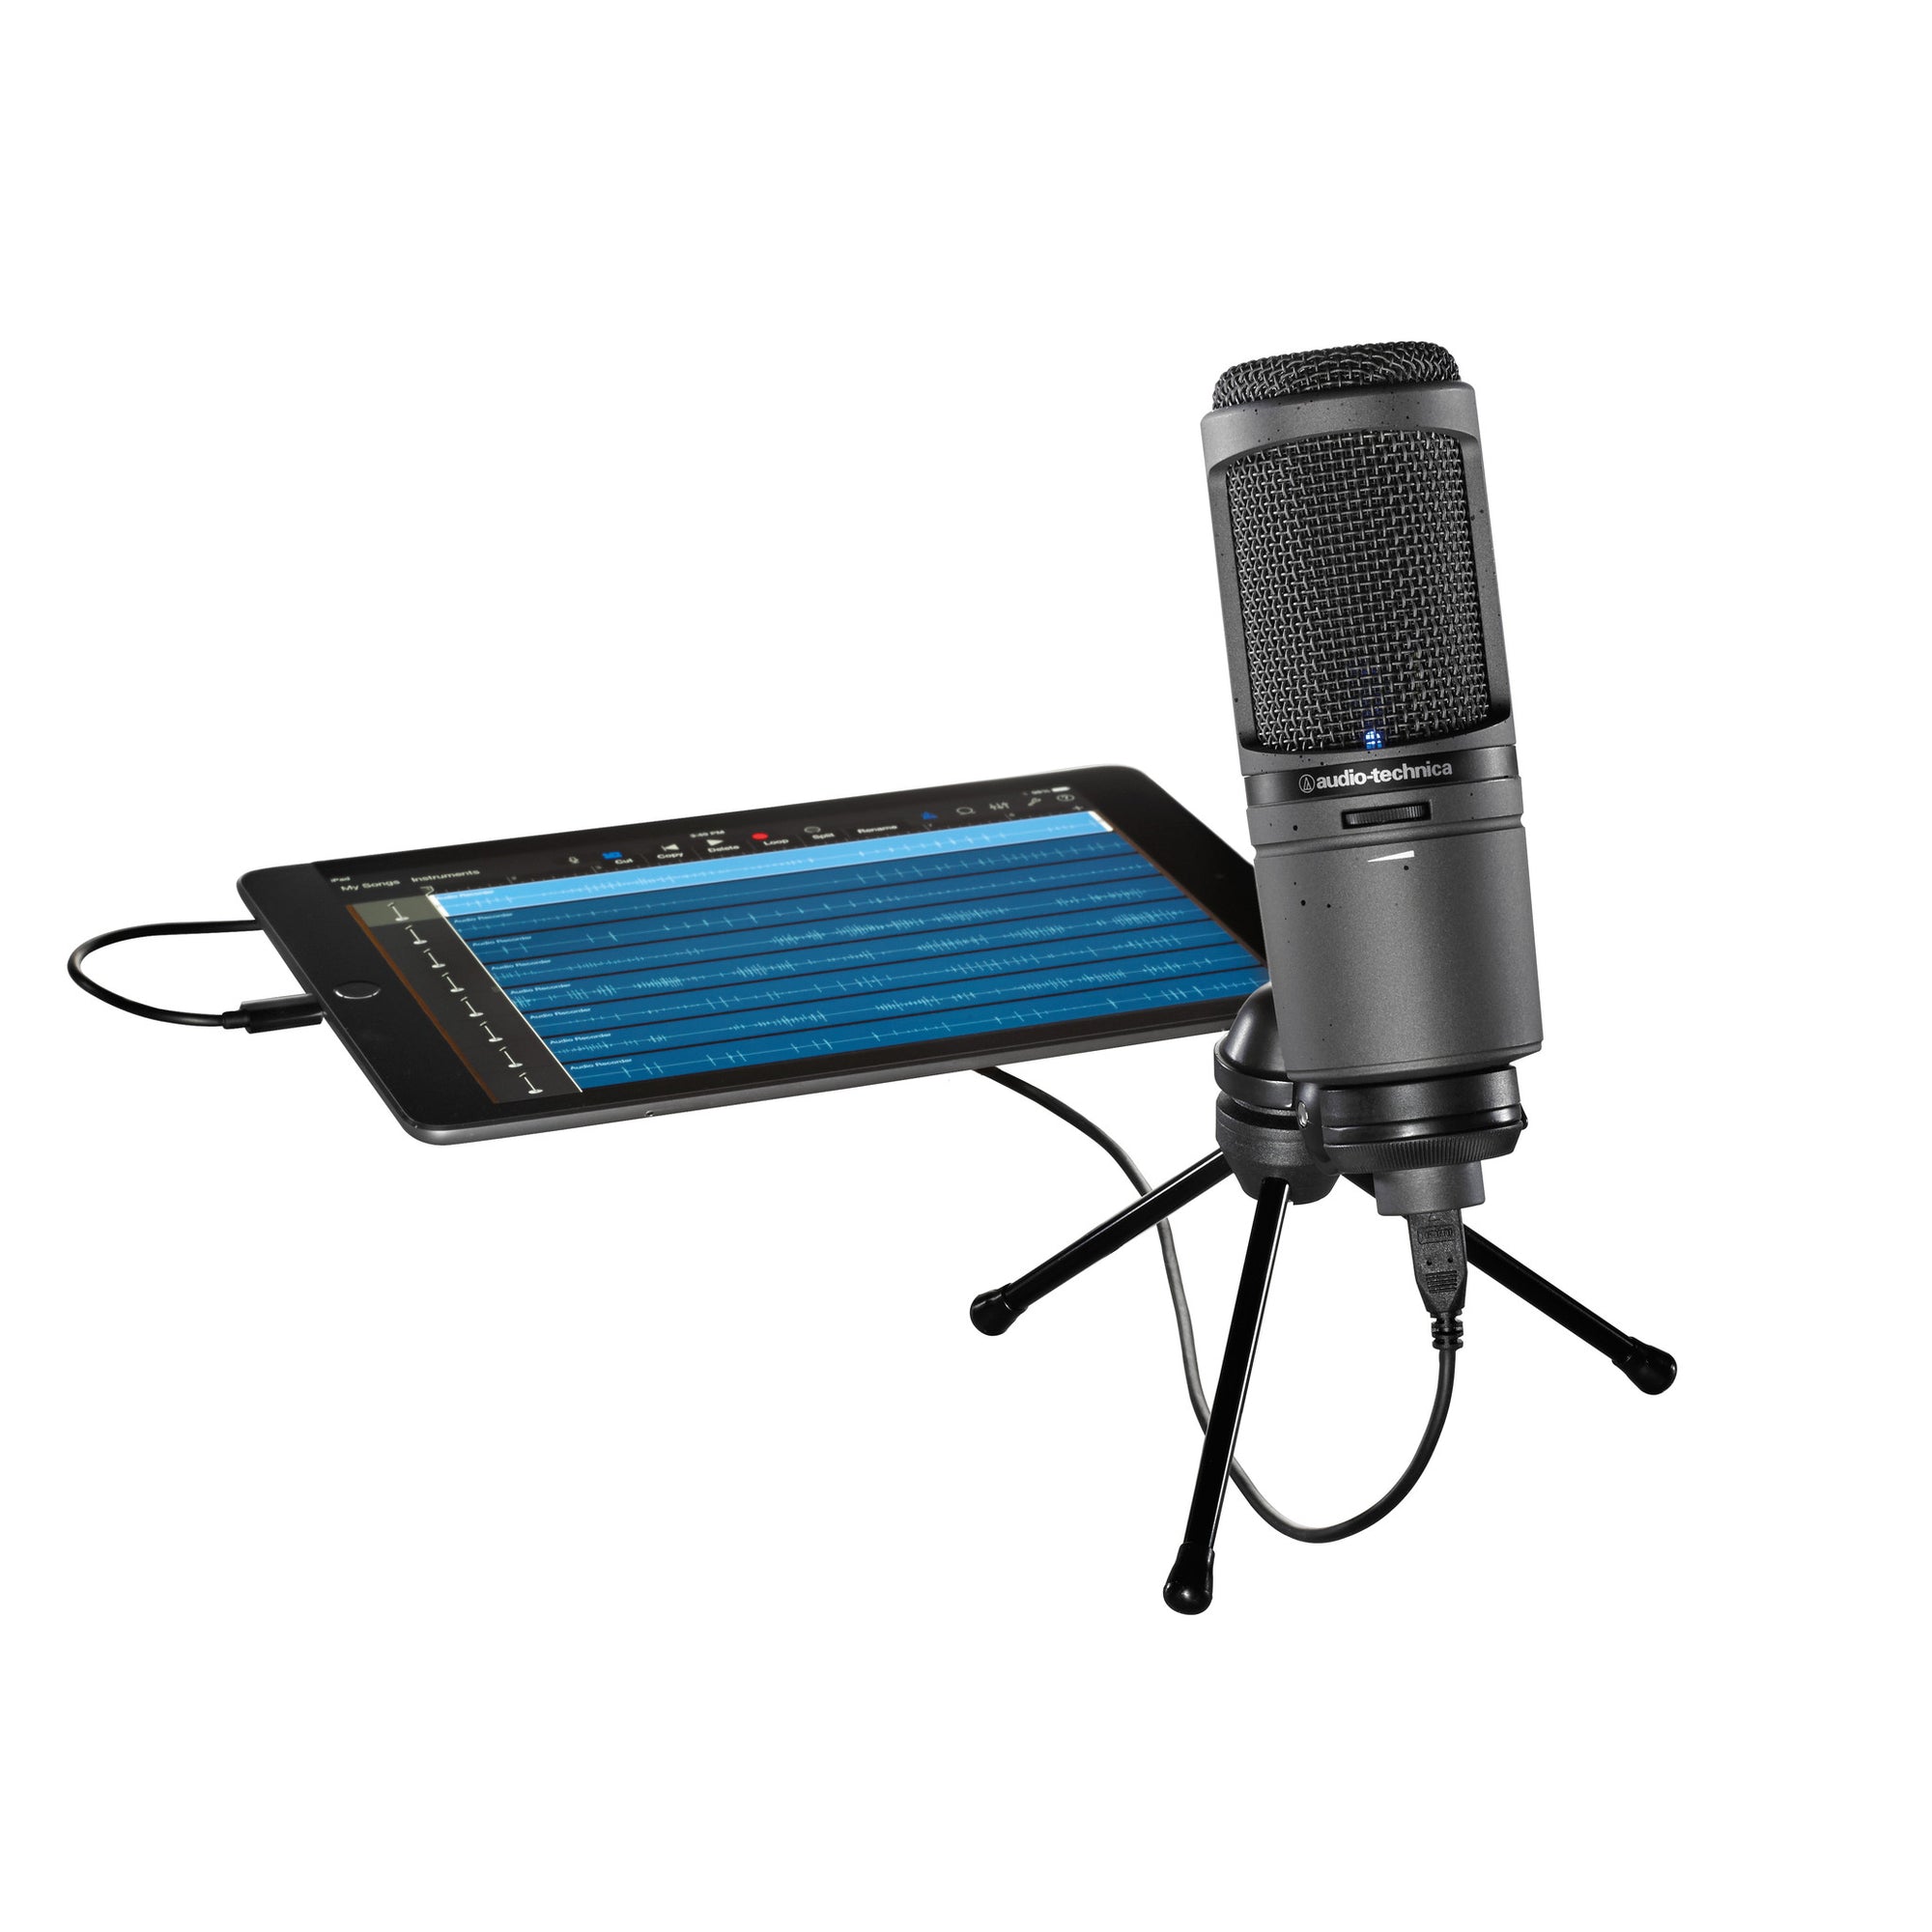 Audio Technica AT2020USBi Cardioid Condenser USB Microphone Audio Technica Condenser Microphone Combining high-resolution audio with increased connectivity options, the AT2020USBi cardioid condenser microphone adds a new level of sound-quality and